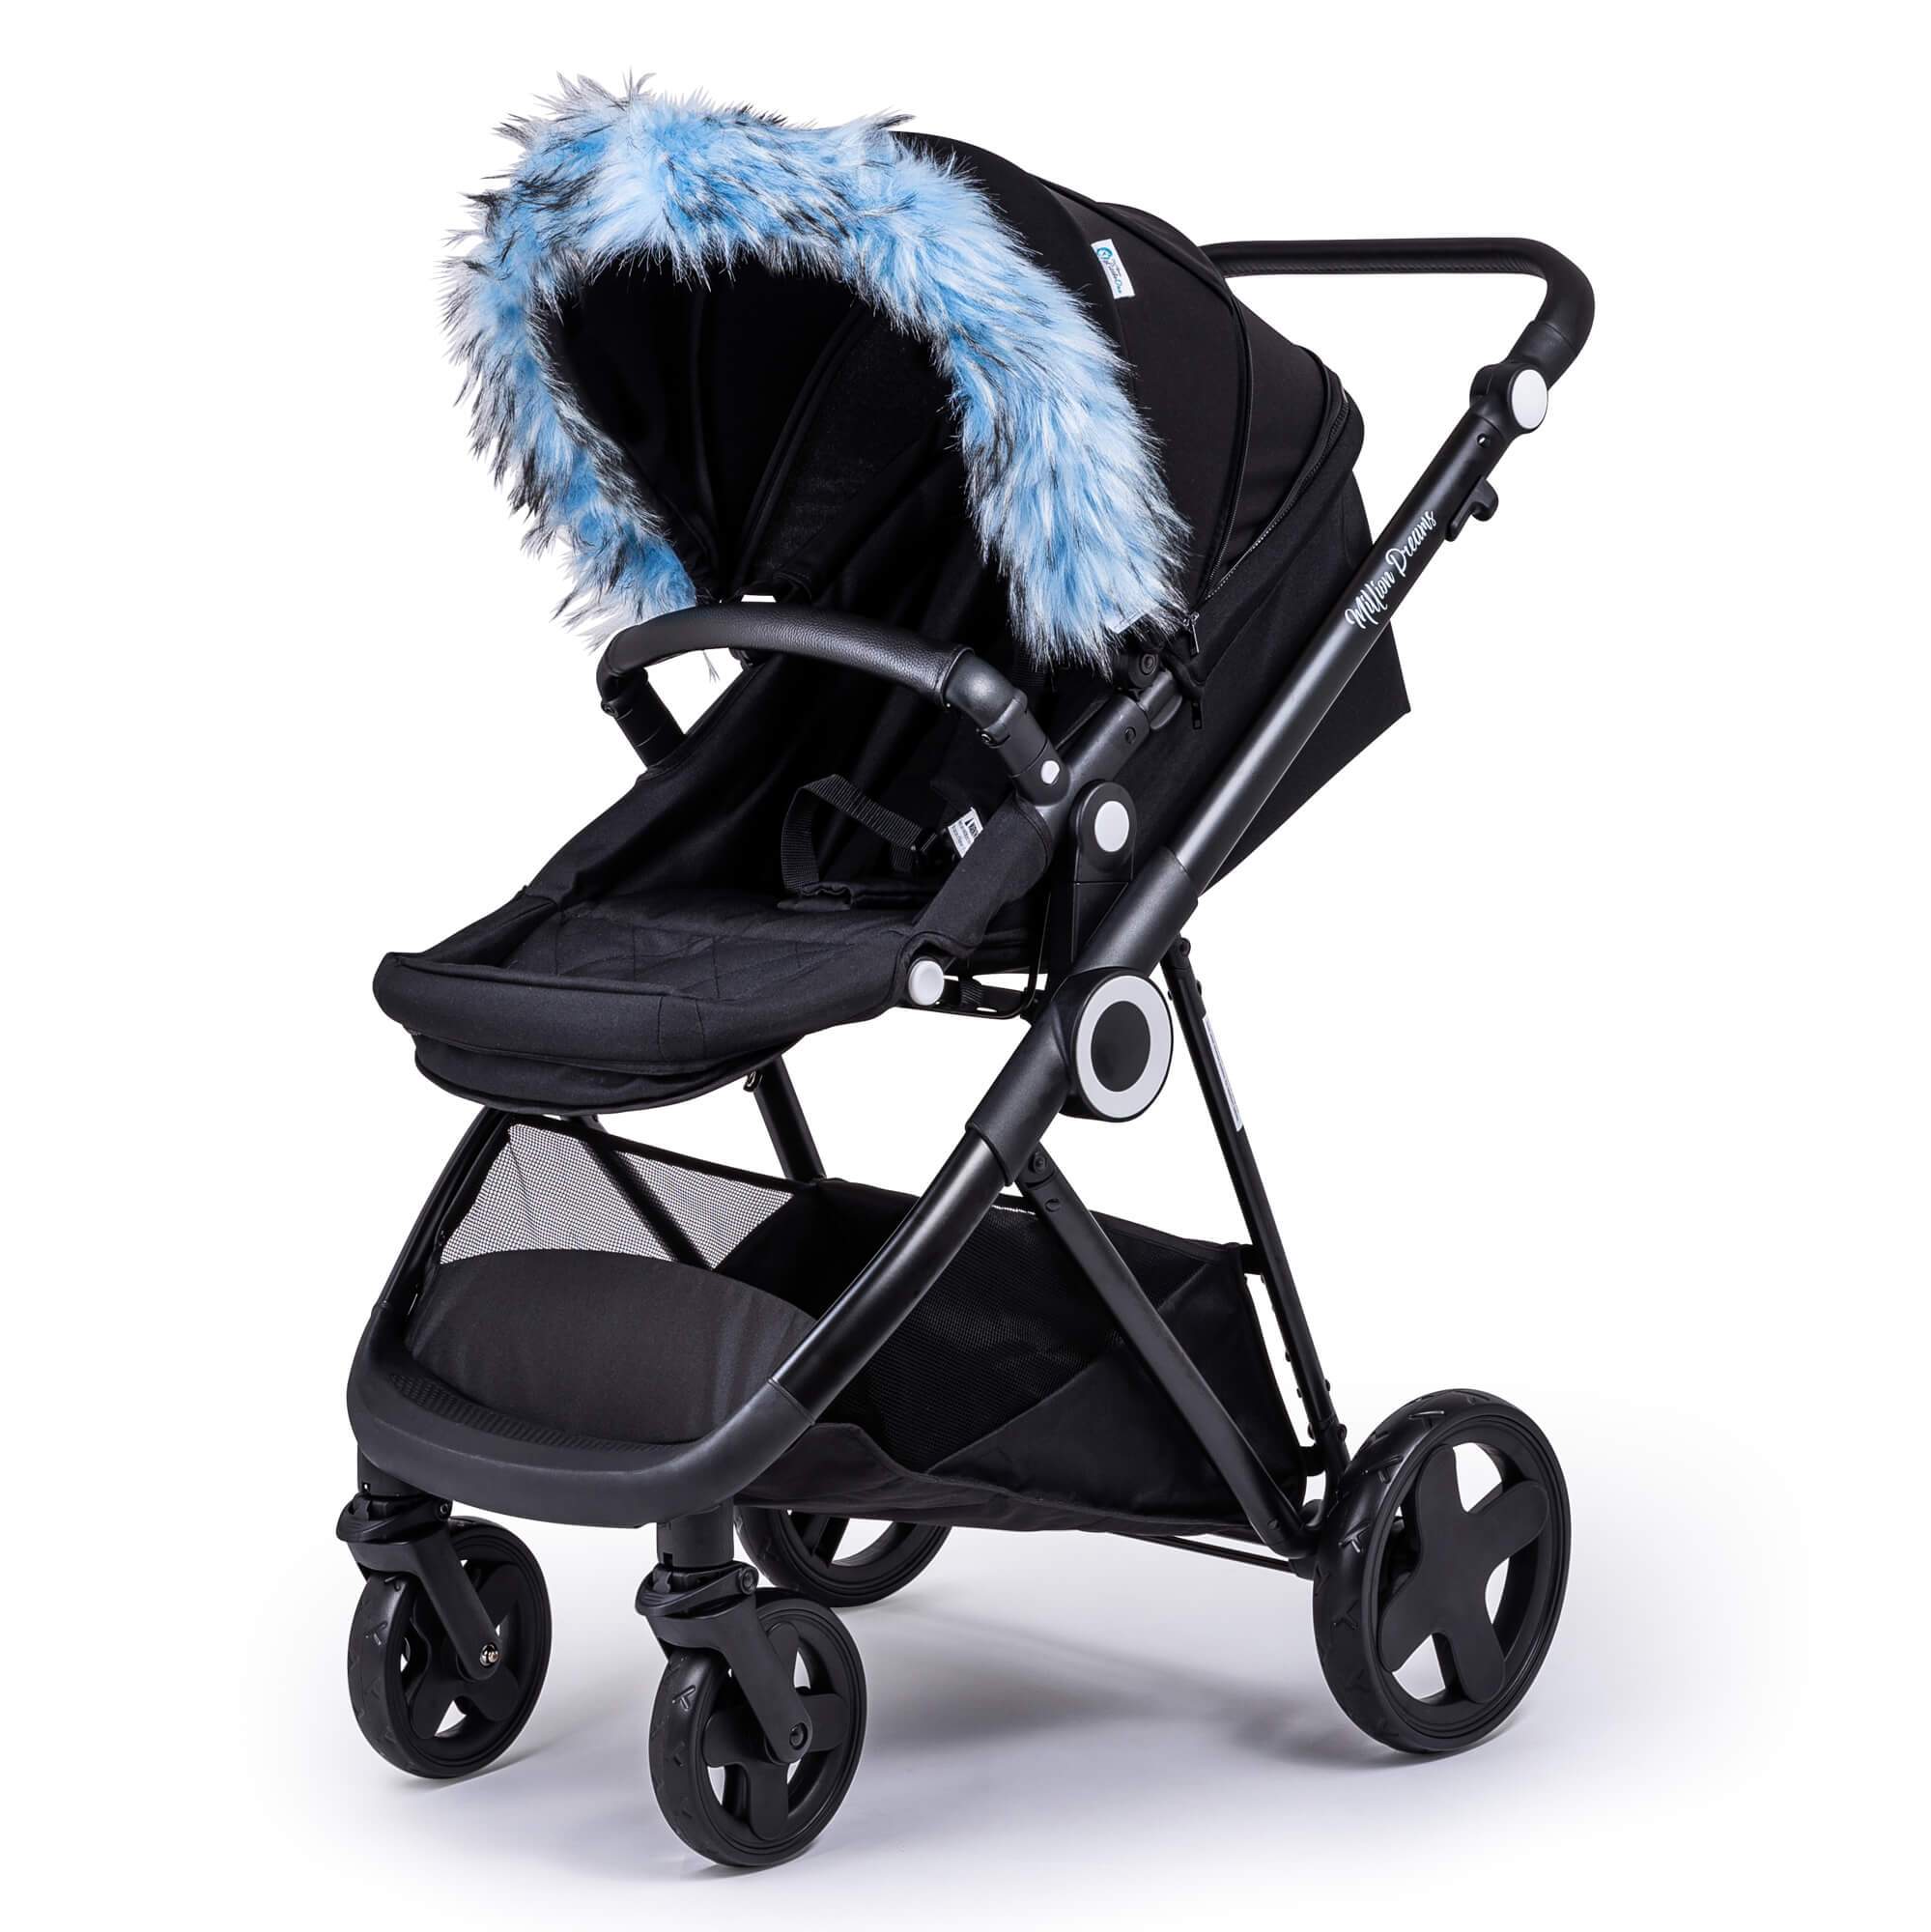 Pram Fur Hood Trim Attachment for Pushchair Compatible with Excel - Light Blue / Fits All Models | For Your Little One